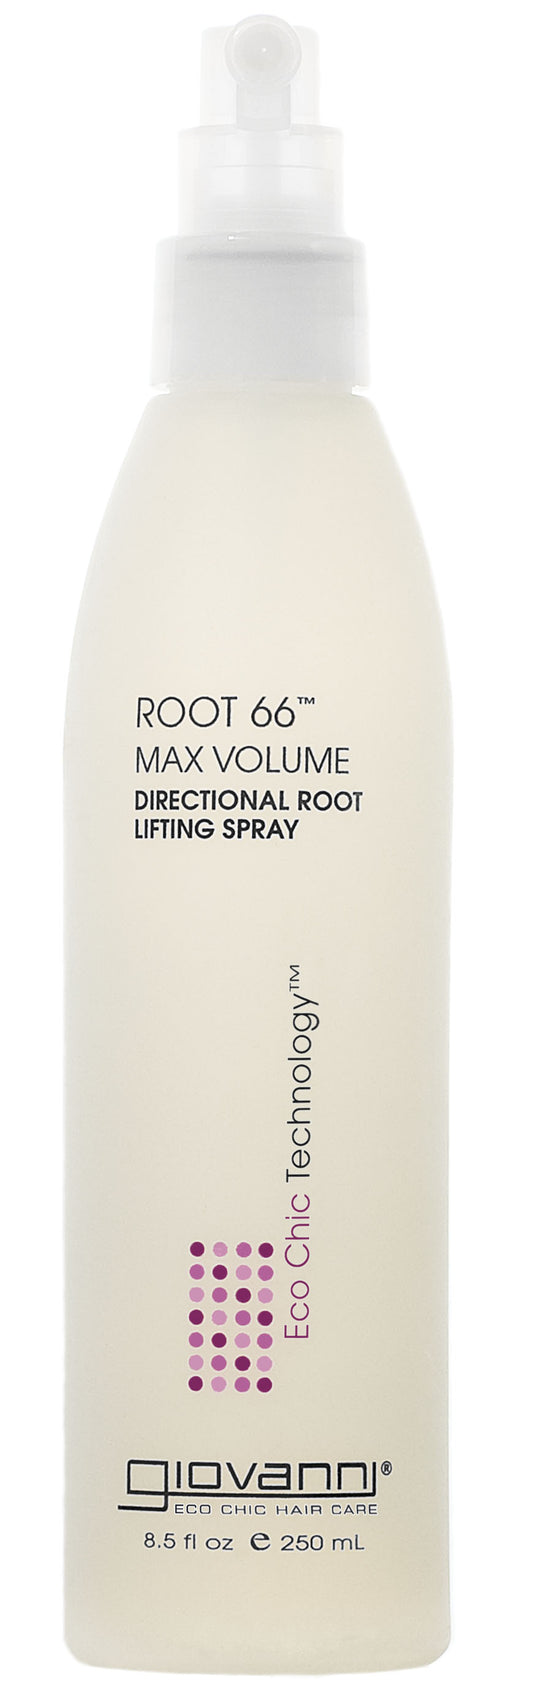 Giovanni Root 66 Max Volume Directional Root Lifting Spray 250ml - 250ml